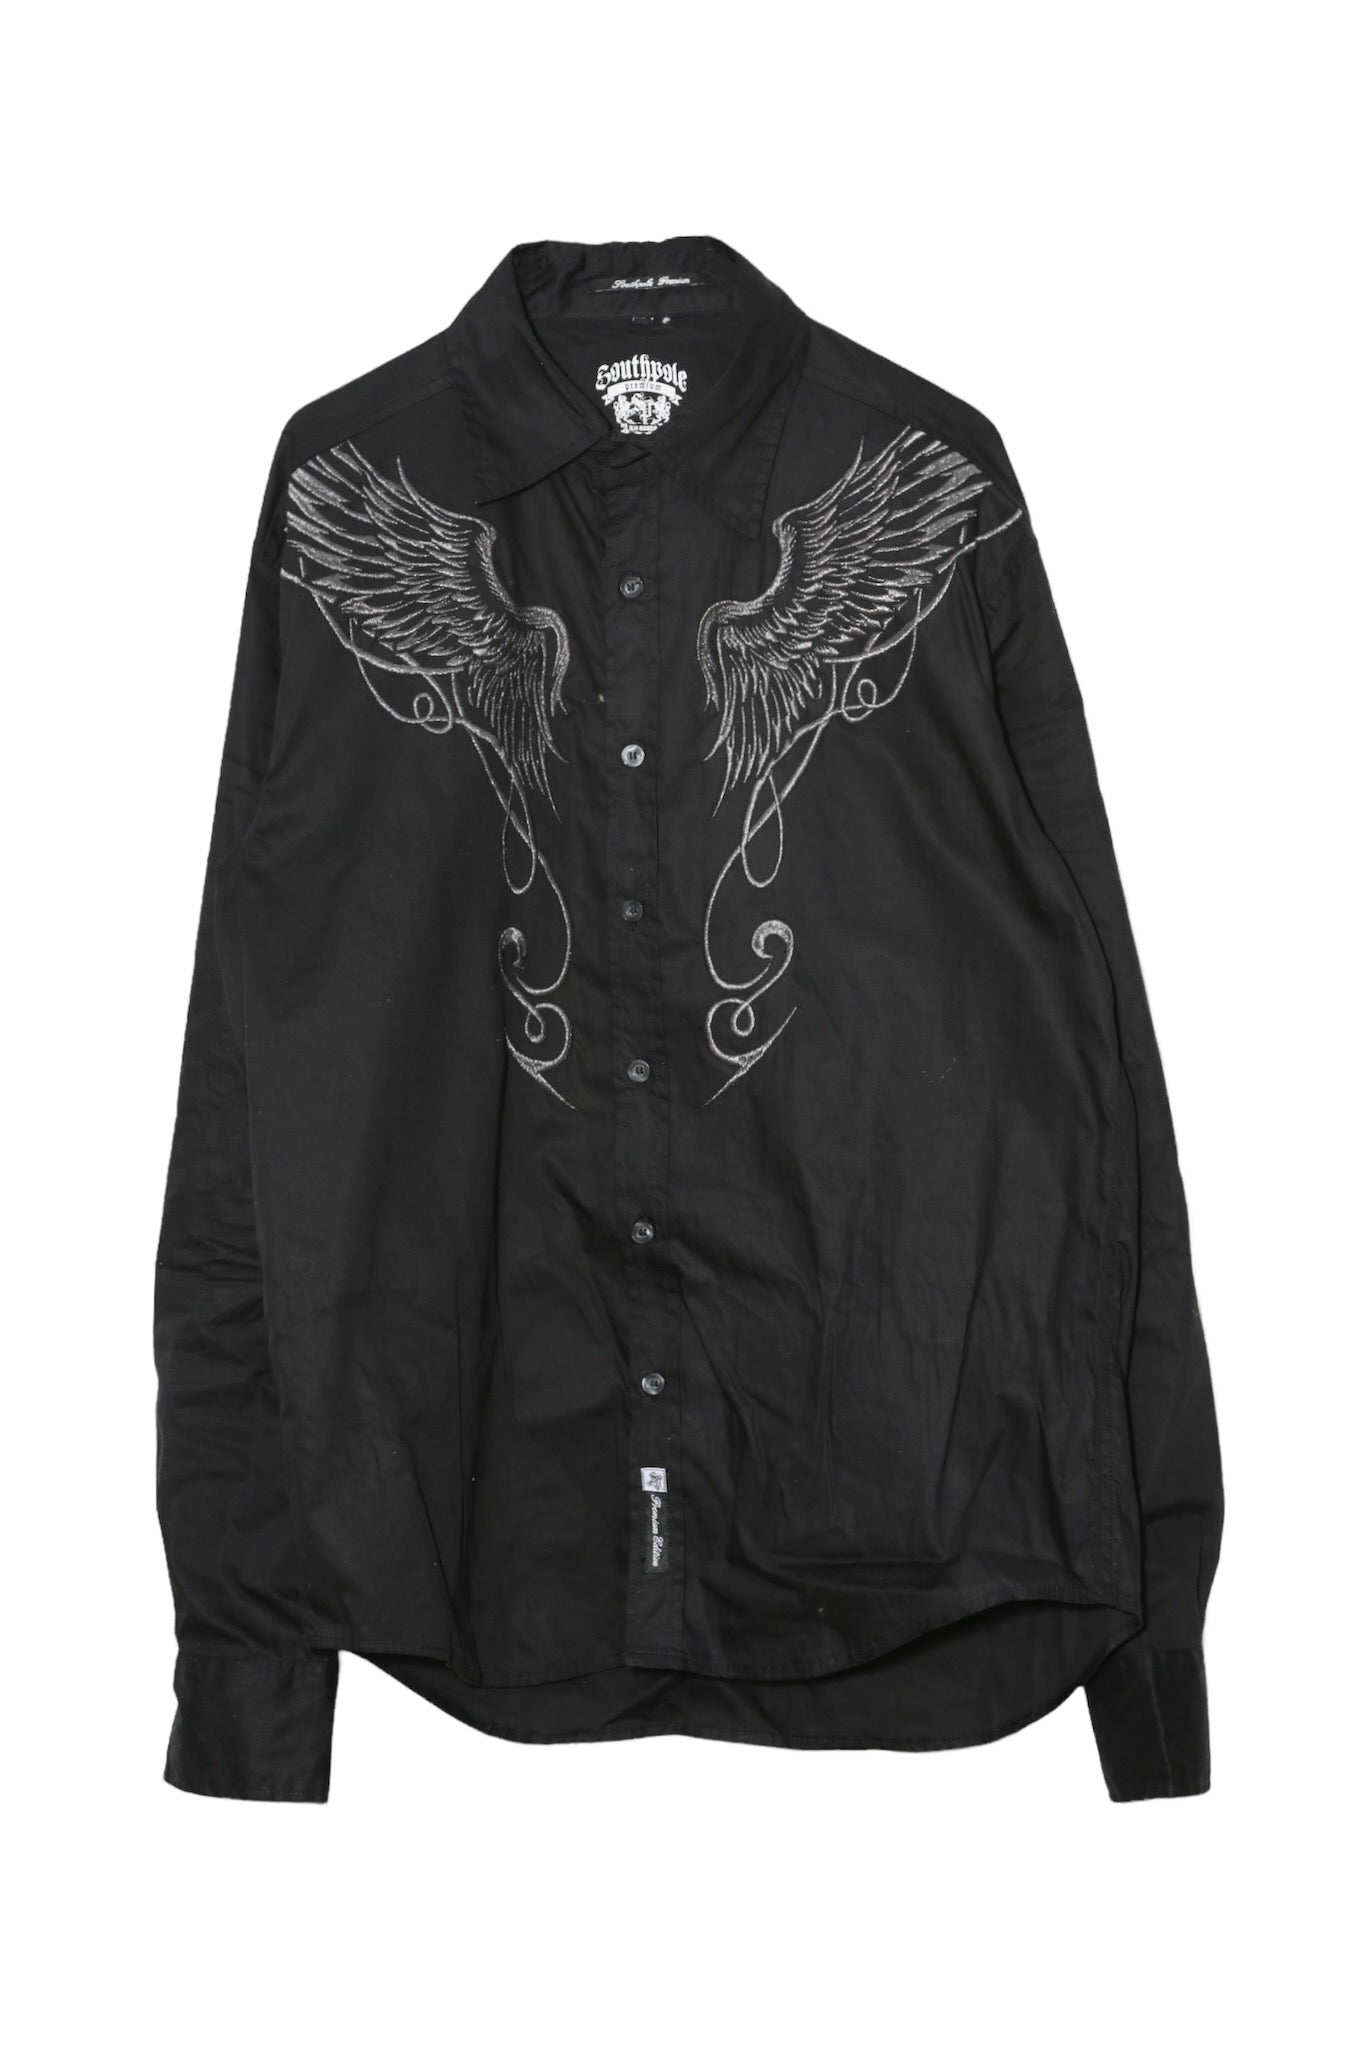 WING EMBROIDERY SHIRT